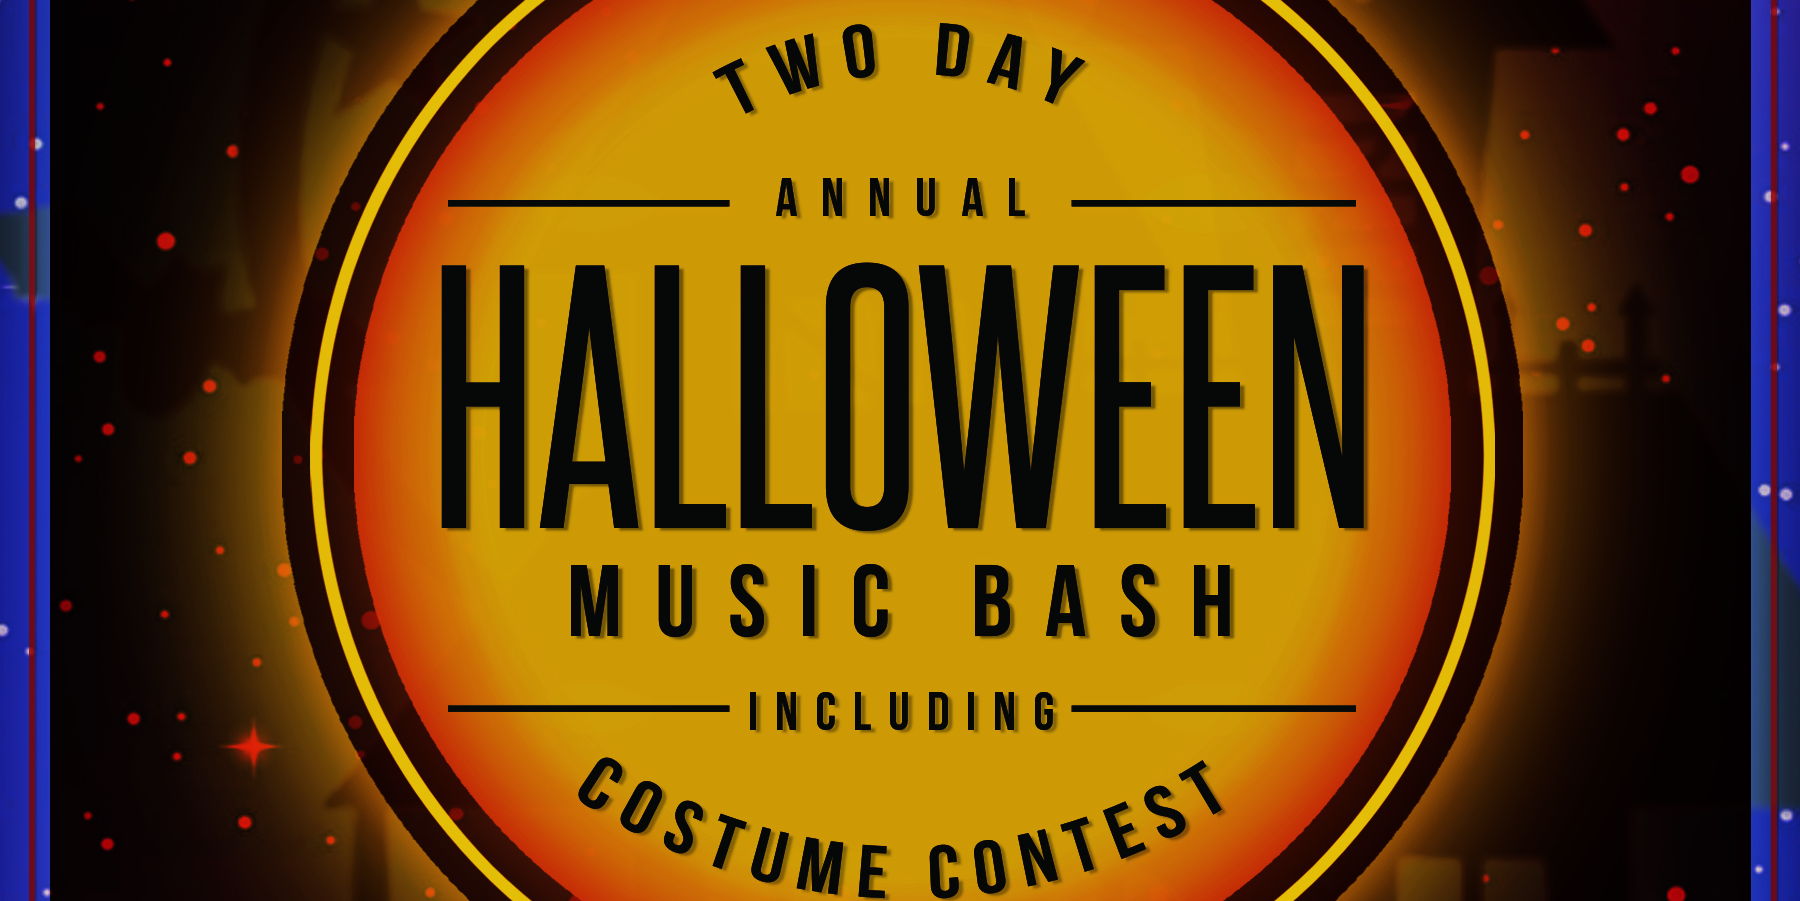 Annual Halloween Music Bash promotional image